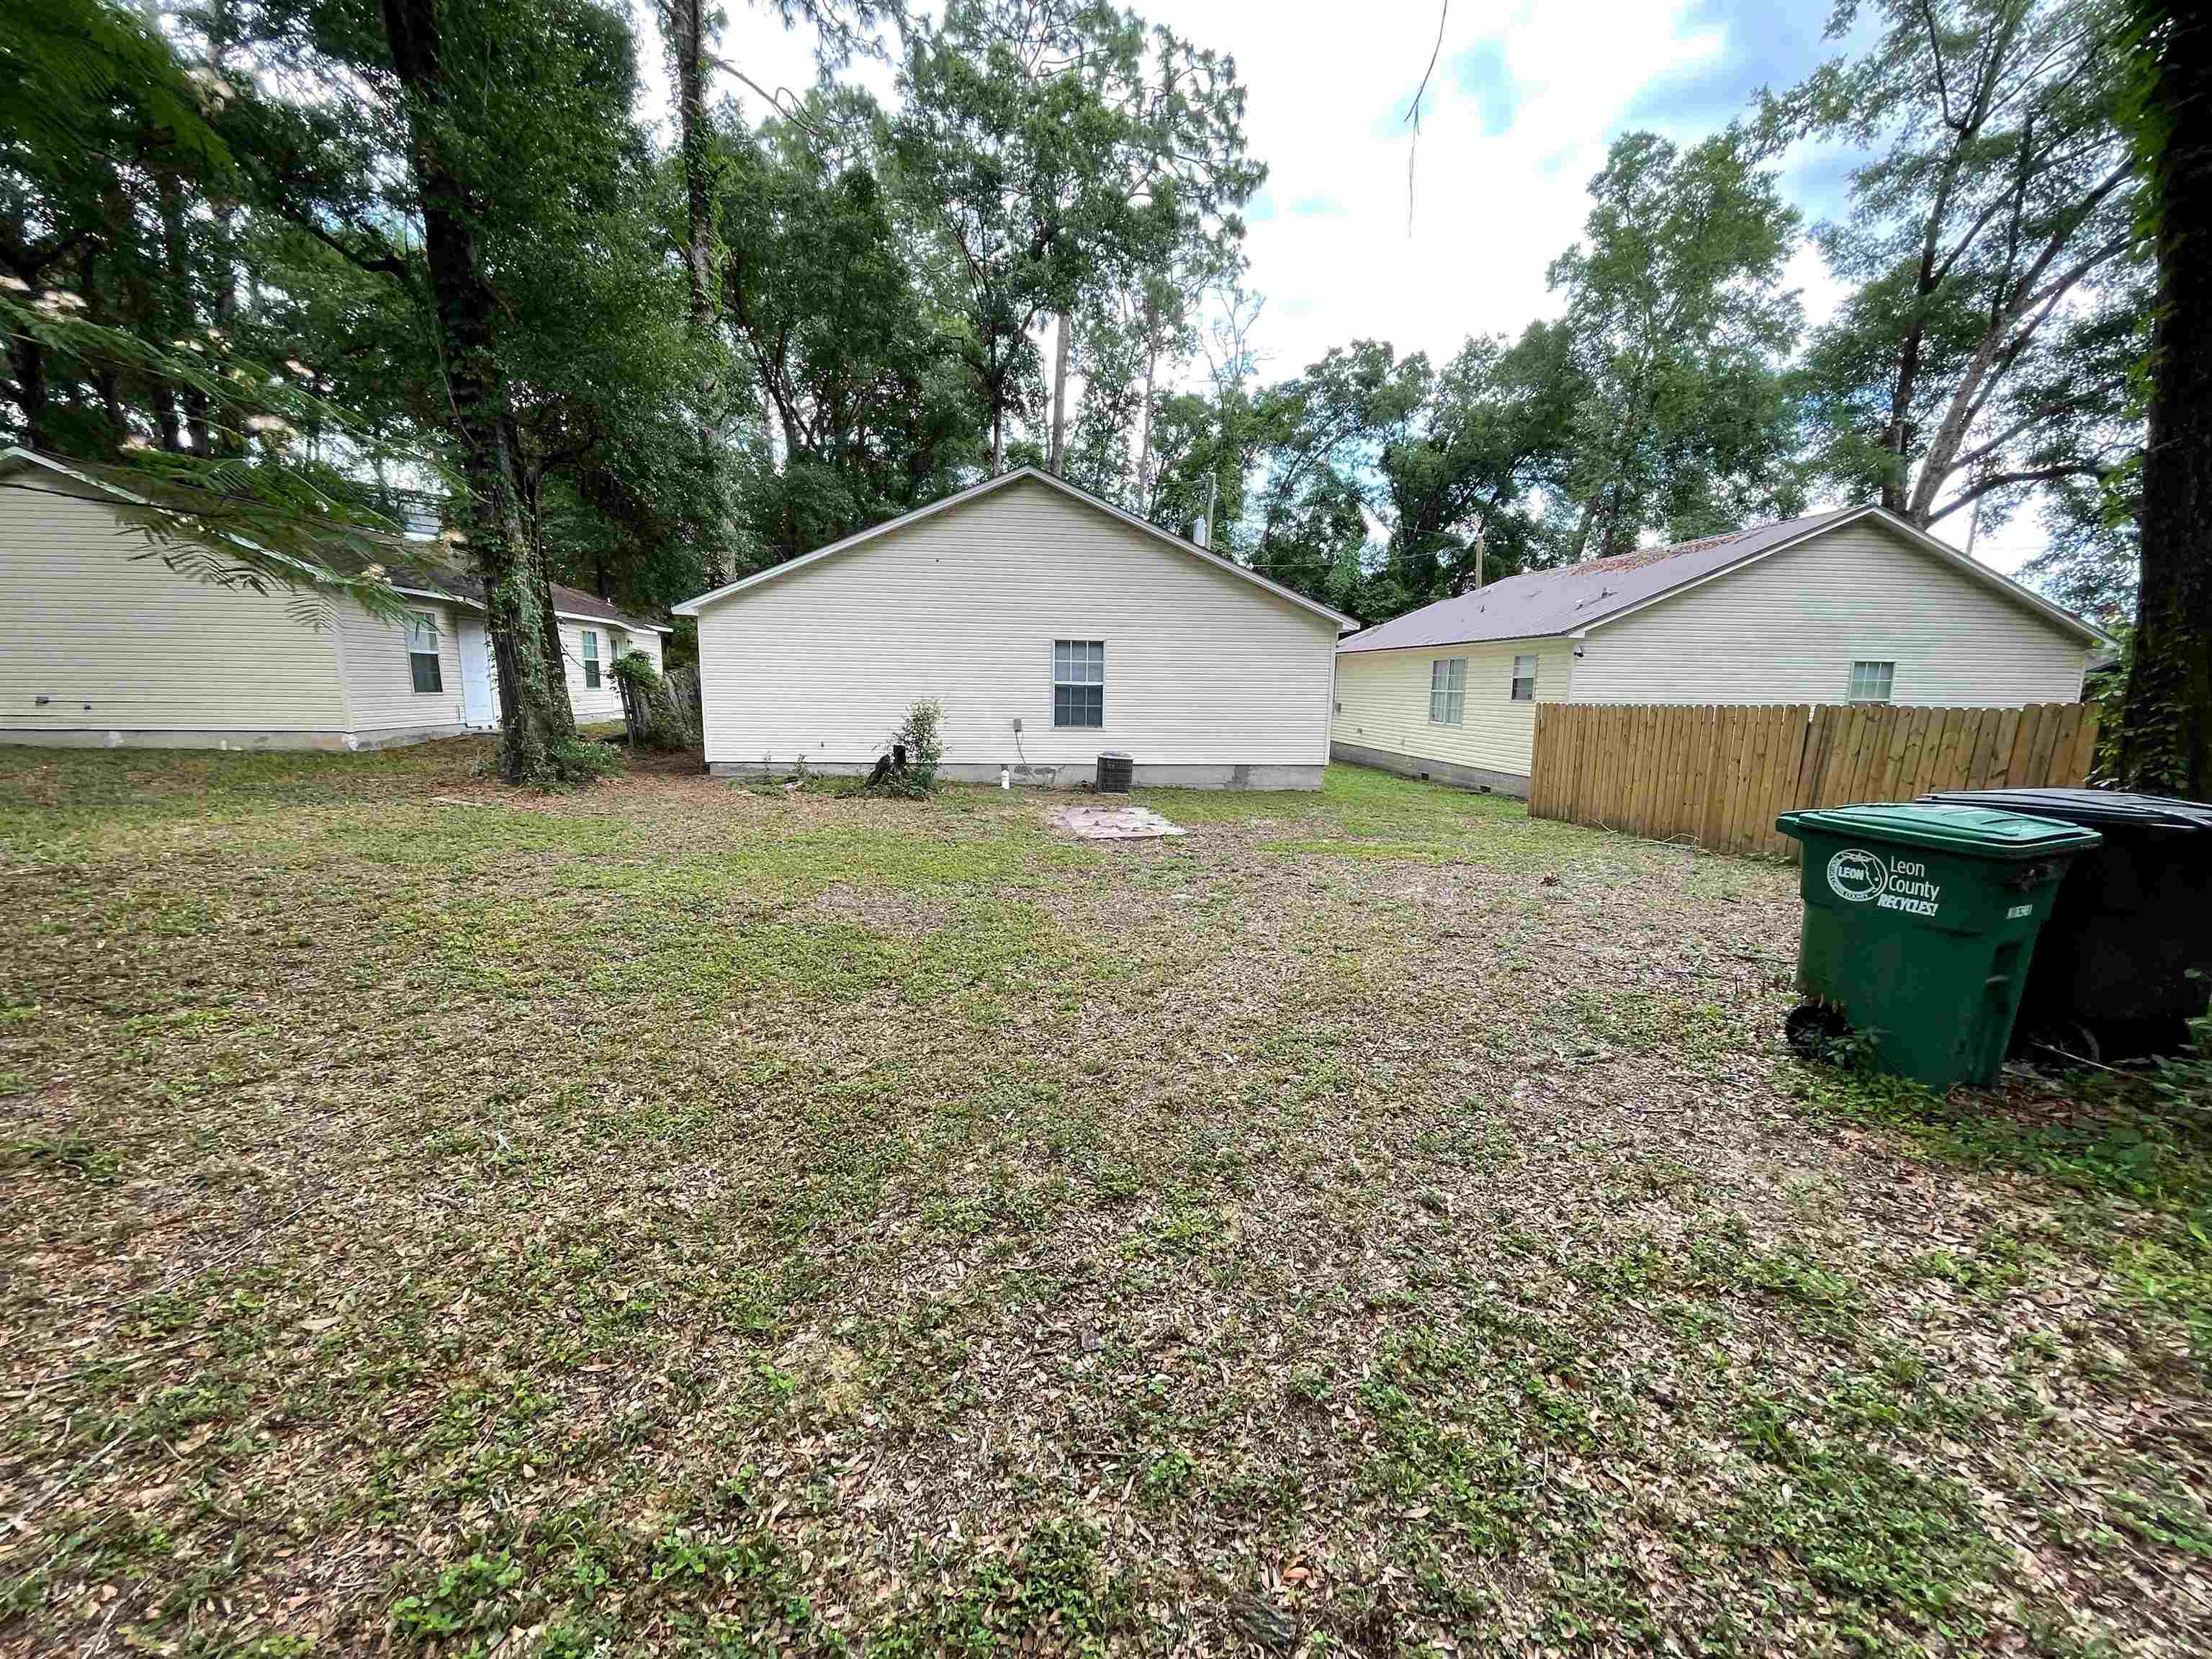 5916 Orchid Seed Ln,TALLAHASSEE,Florida 32305,4 Bedrooms Bedrooms,2 BathroomsBathrooms,Detached single family,5916 Orchid Seed Ln,368859